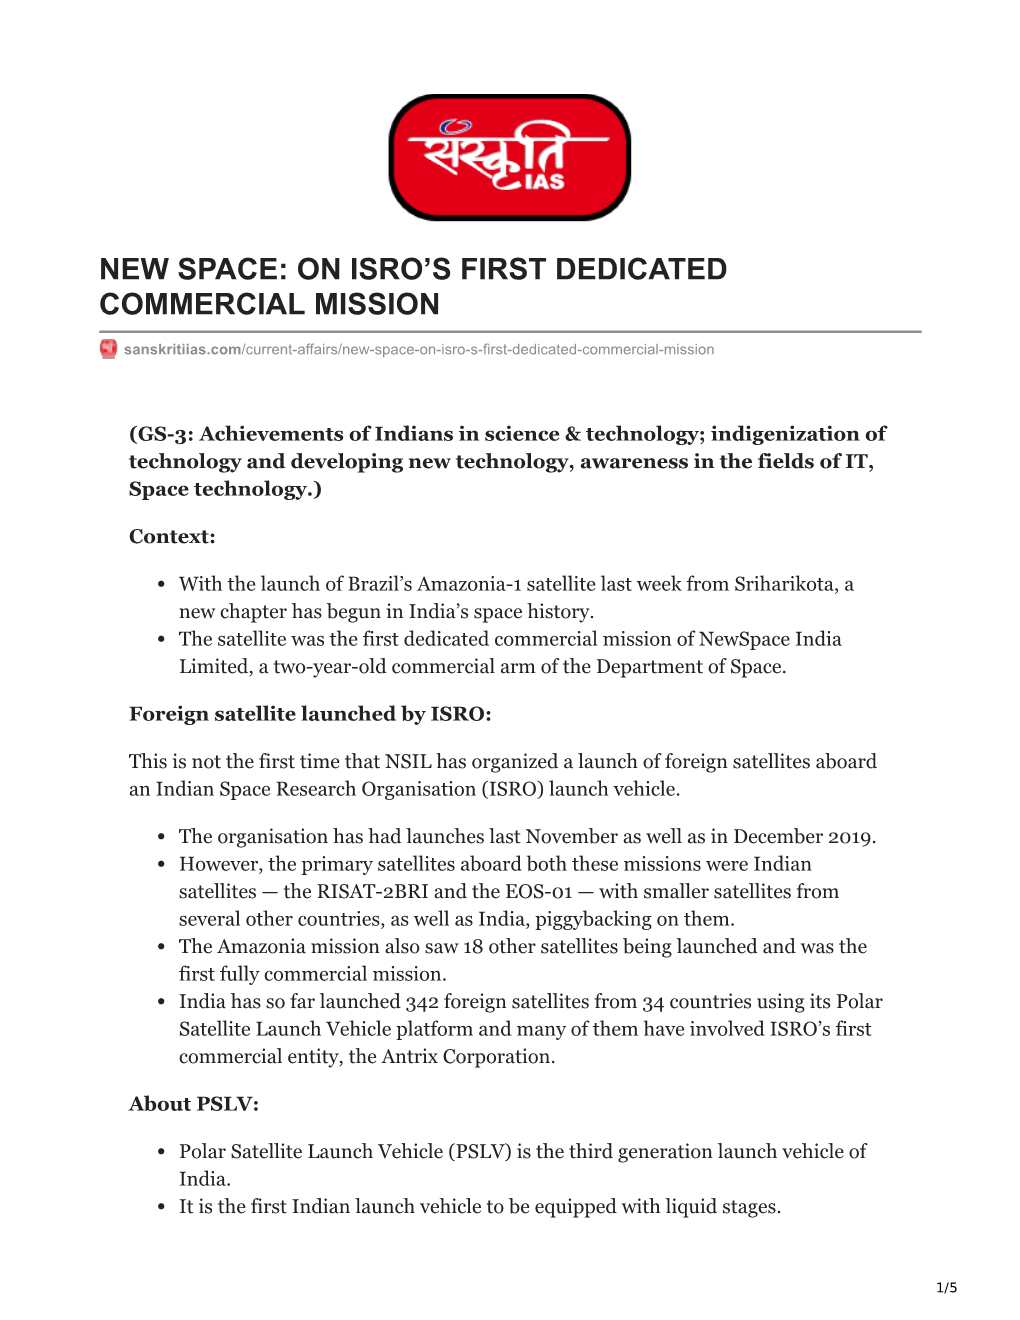 New Space: on Isro's First Dedicated Commercial